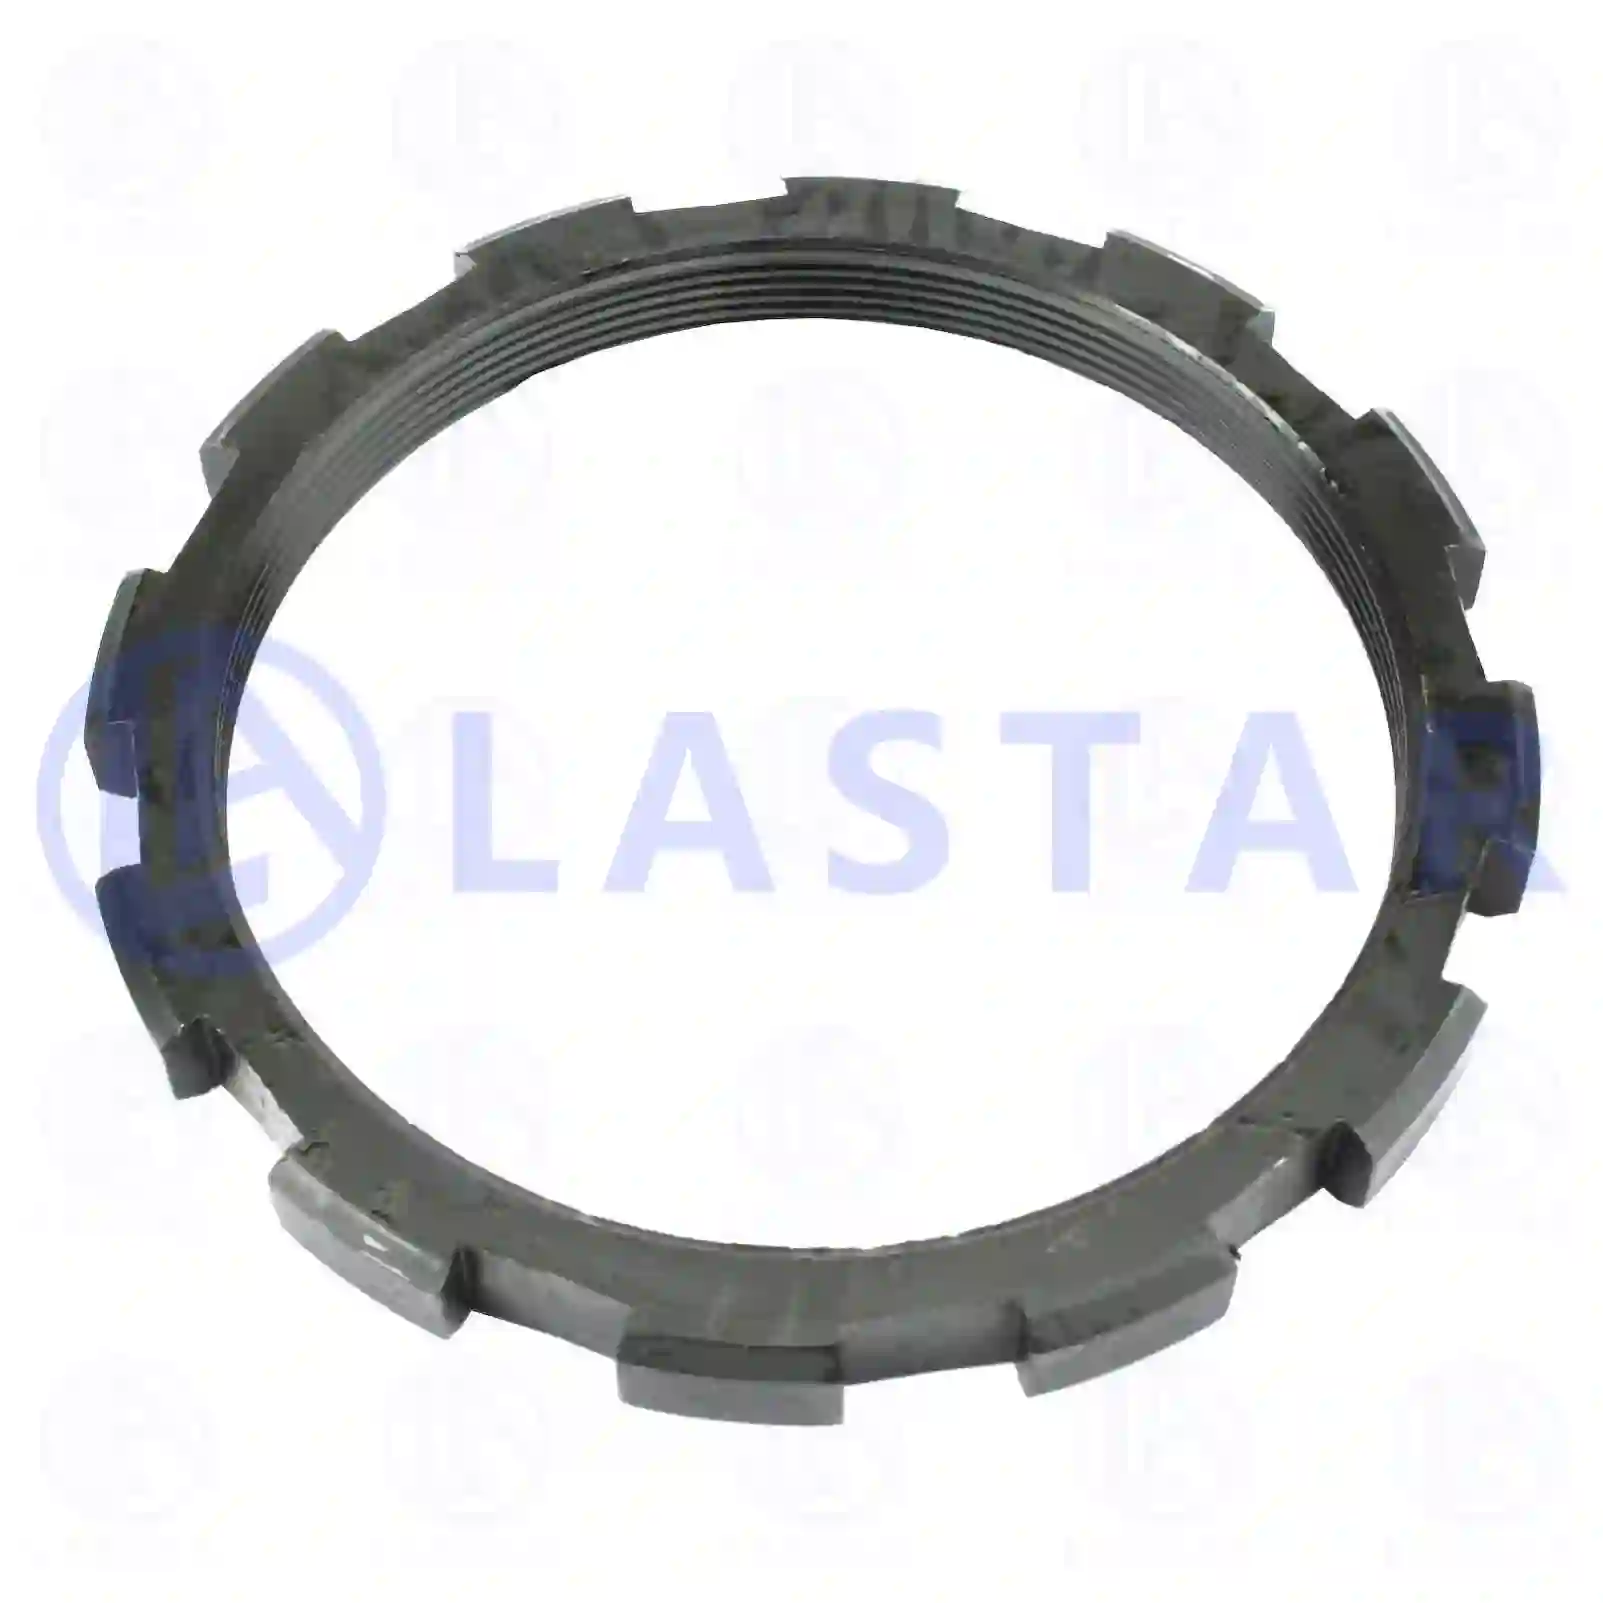 Grooved nut, 77730665, 81906200048, 3553560126, 9423560026, 2V5501215C, ZG30041-0008 ||  77730665 Lastar Spare Part | Truck Spare Parts, Auotomotive Spare Parts Grooved nut, 77730665, 81906200048, 3553560126, 9423560026, 2V5501215C, ZG30041-0008 ||  77730665 Lastar Spare Part | Truck Spare Parts, Auotomotive Spare Parts